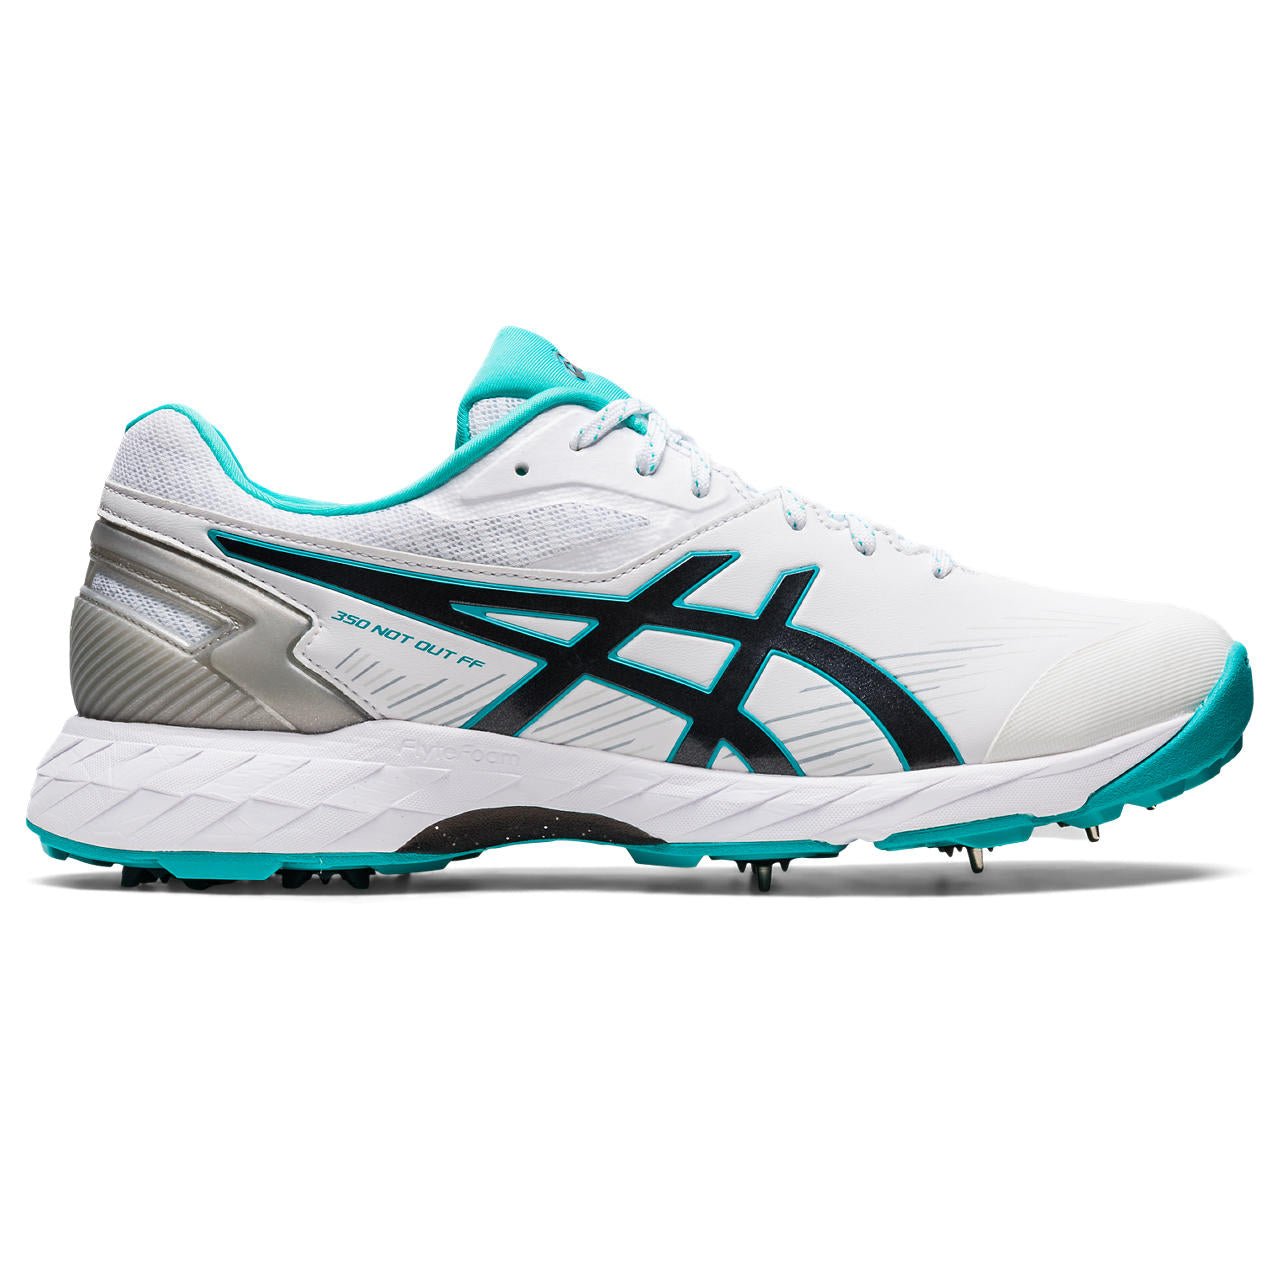 Asics Gel 350 Not Out Cricket Spikes White/Sky Blue - The Cricket Warehouse